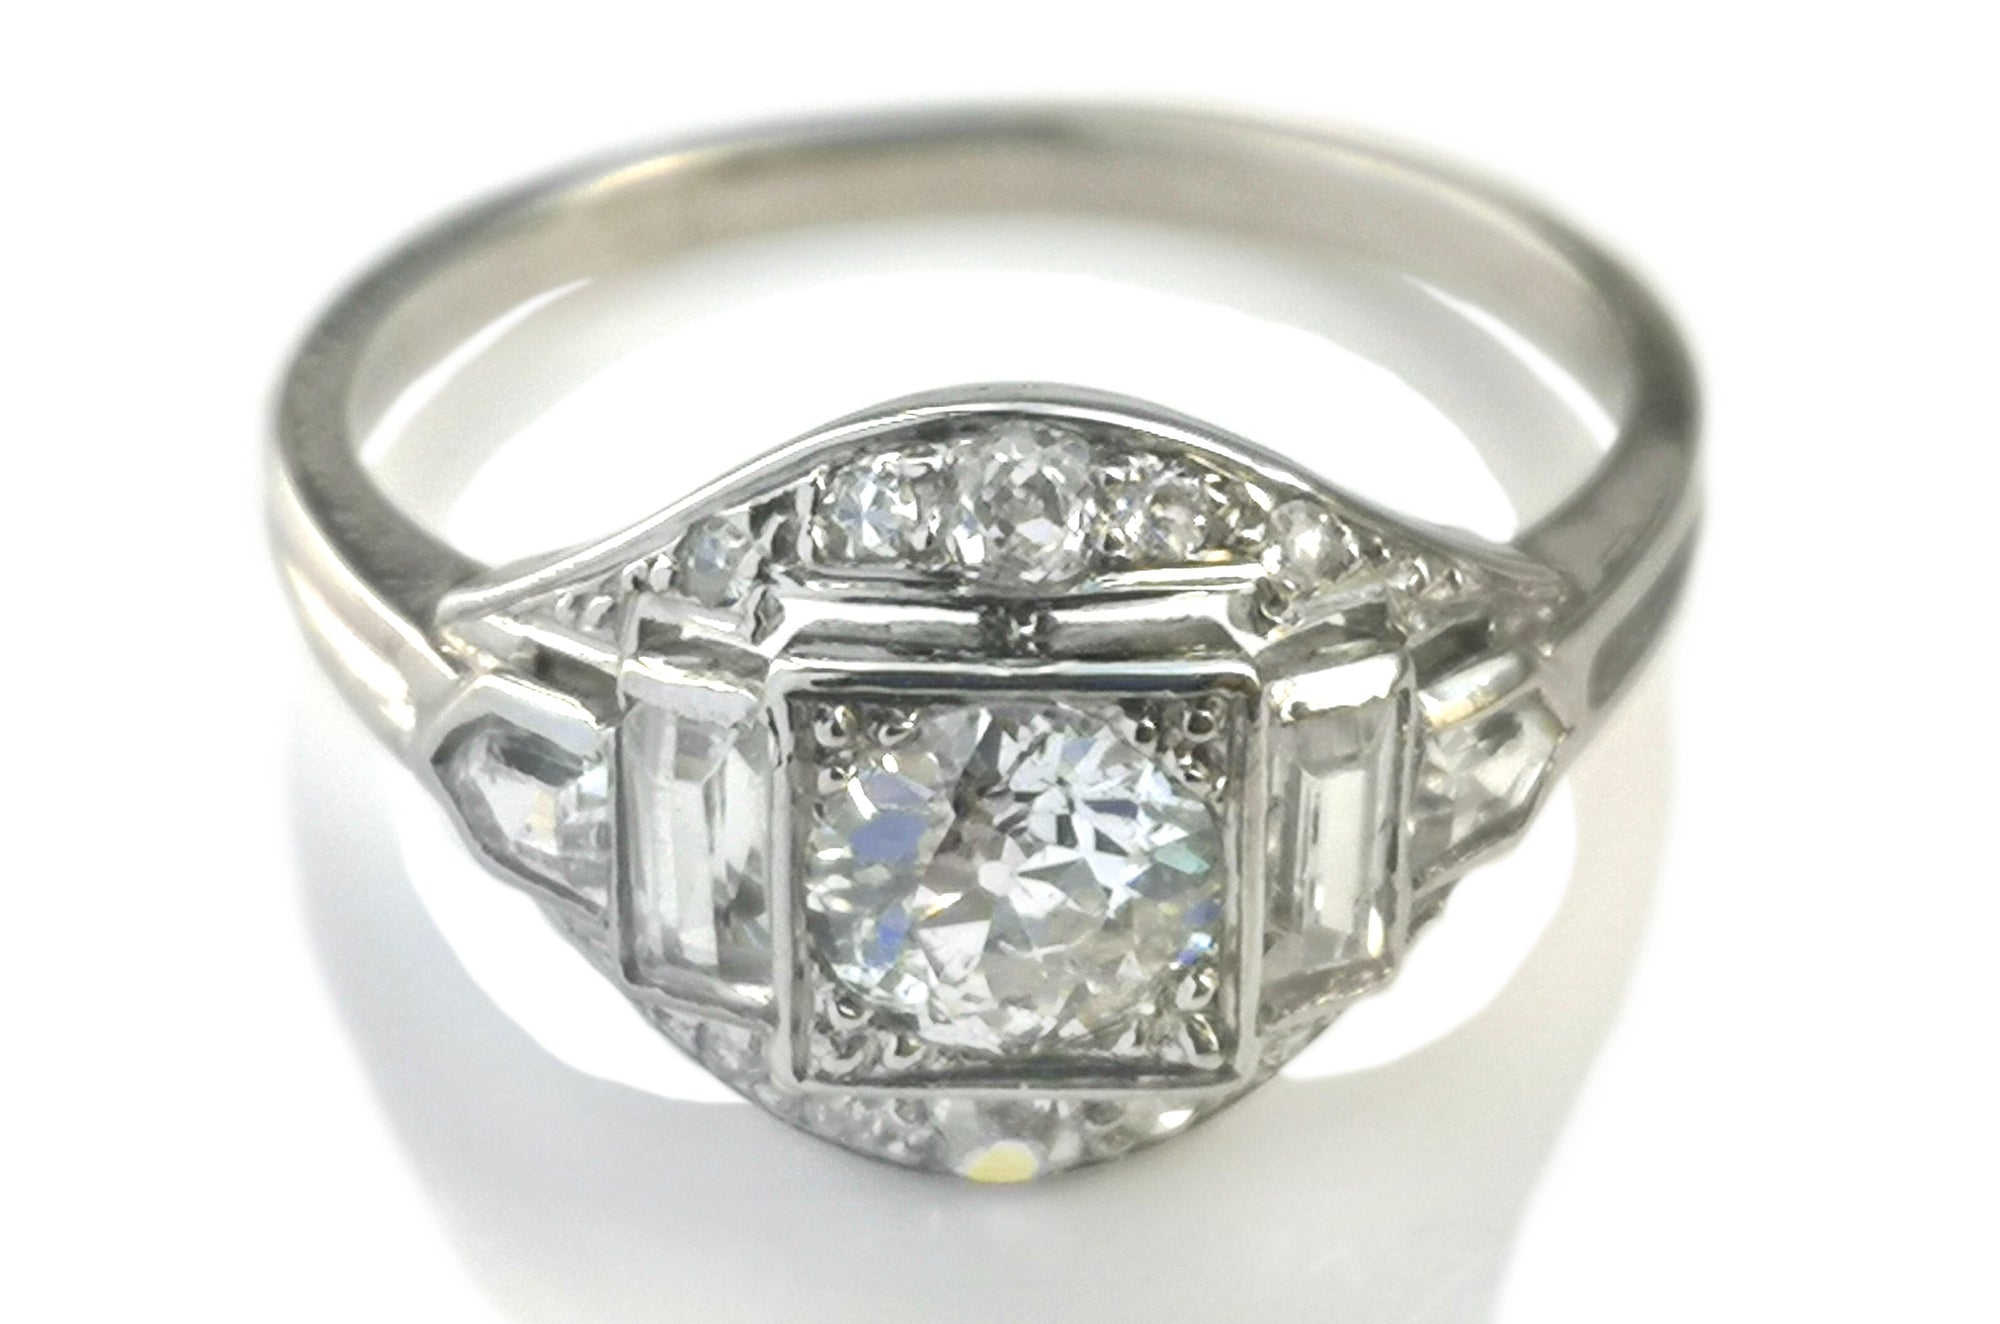 Original 1920s French Art Deco 1.16tcw Baguette & Old Round Cut Diamond Engagement Ring